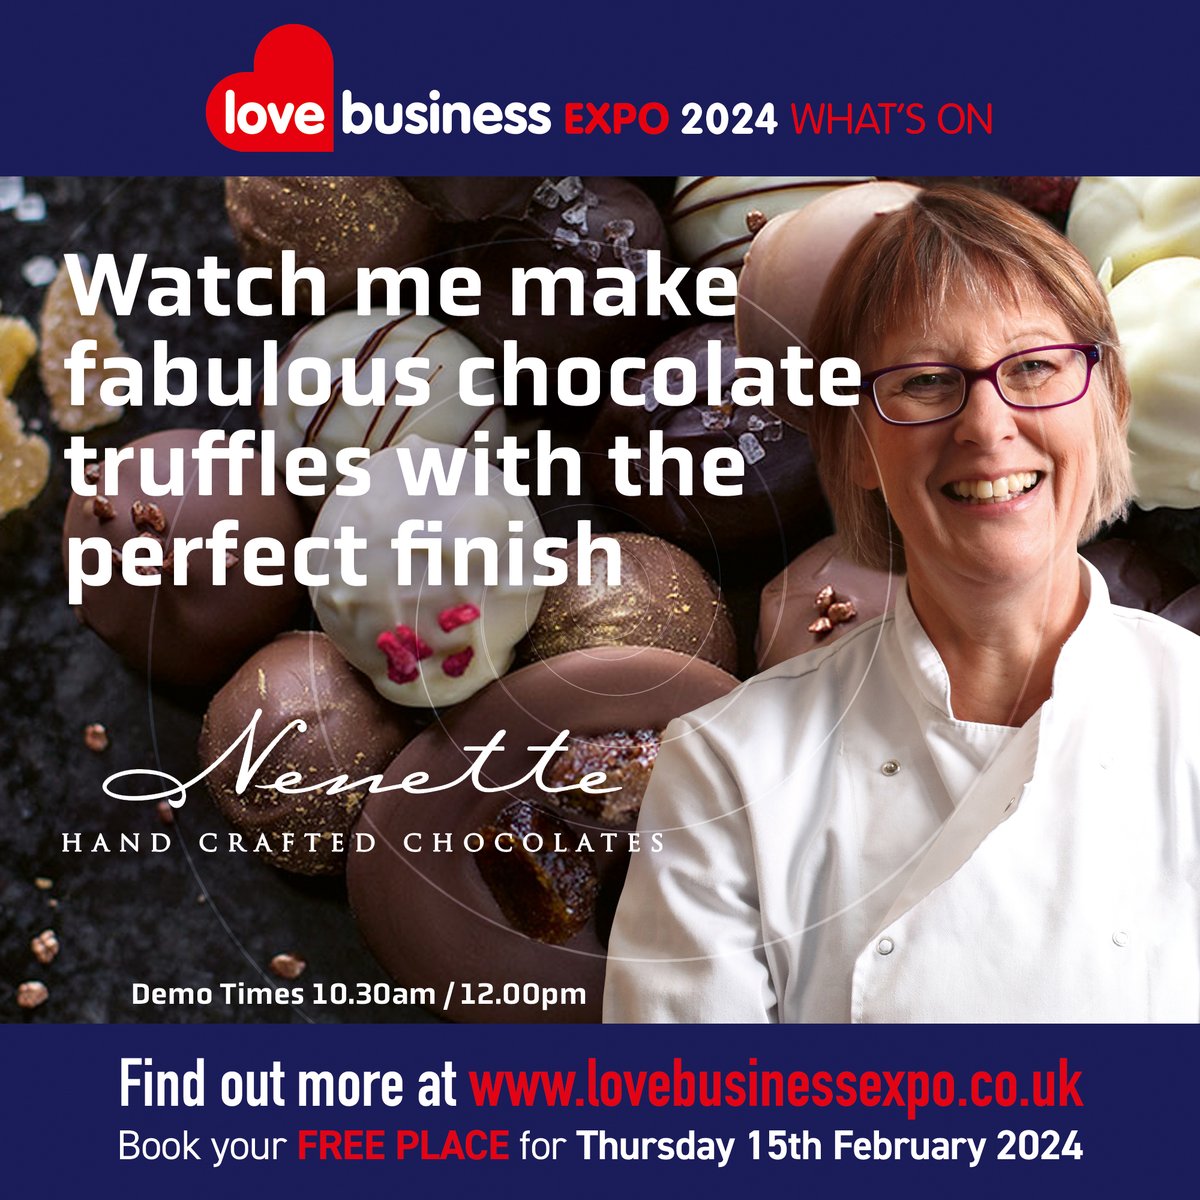 Watch Nenette make fabulous hand crafted chocolate truffles with the perfect finish at Love Business EXPO 2024 on Thursday, February 15th at Holywell Park Conference Centre in Loughborough. Book your FREE delegate ticket for Love Business EXPO 2024. lovebusinessexpo.co.uk